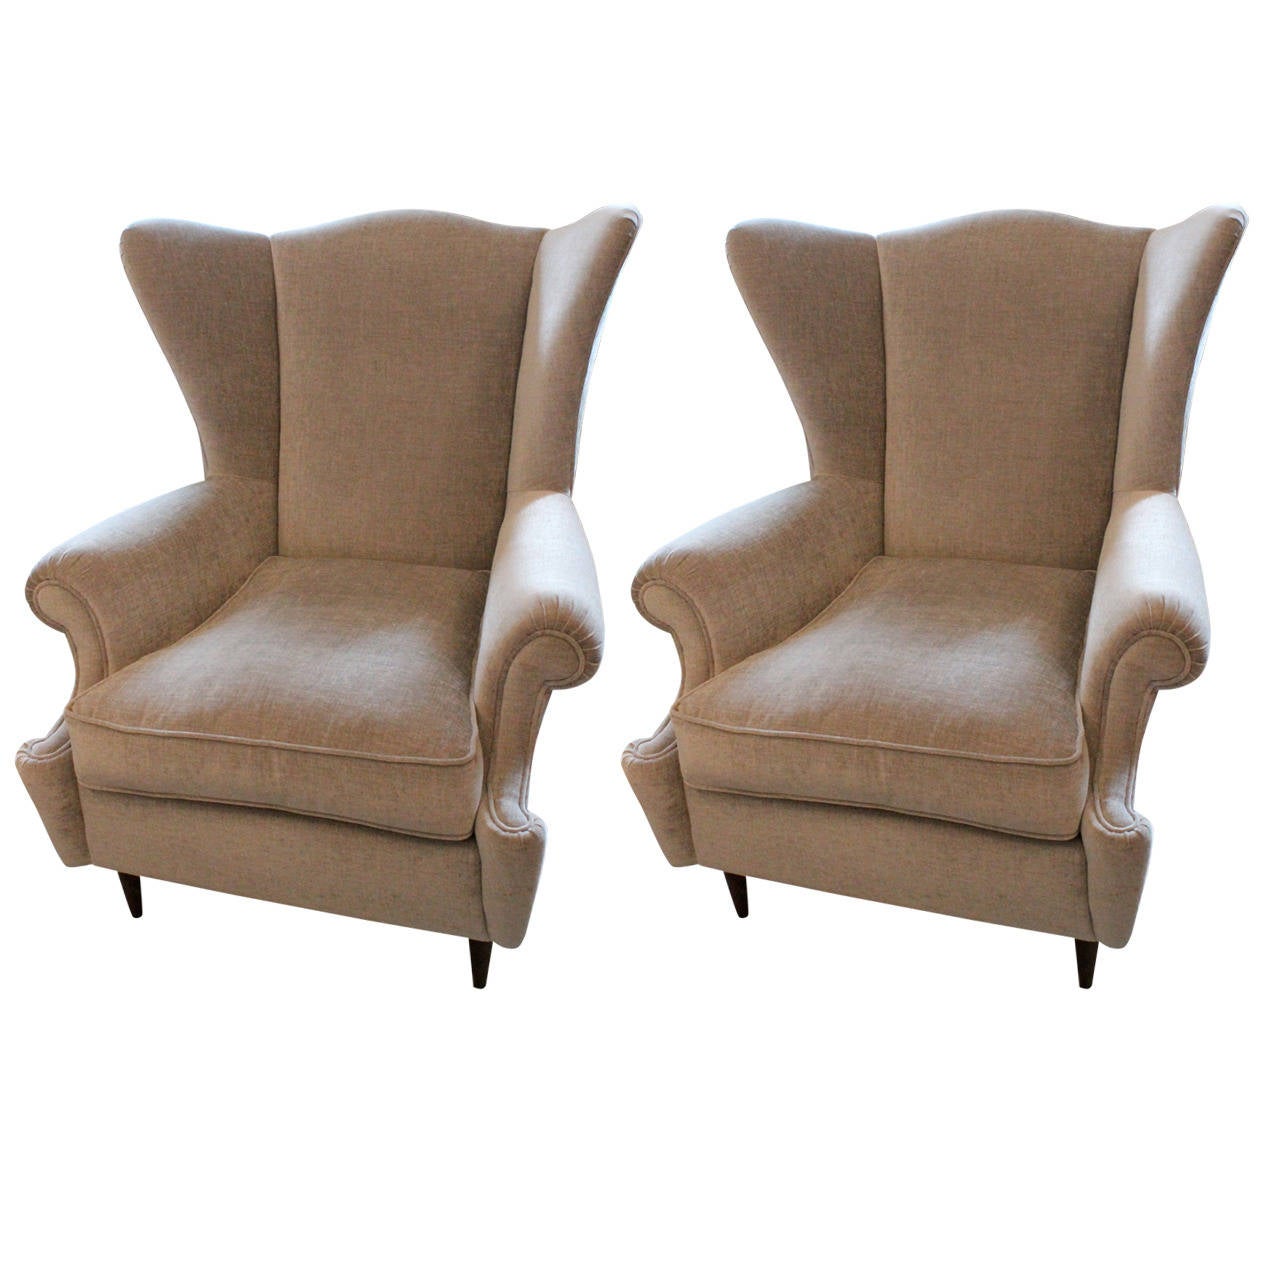 Pair of Italian Armchairs, 1940s For Sale